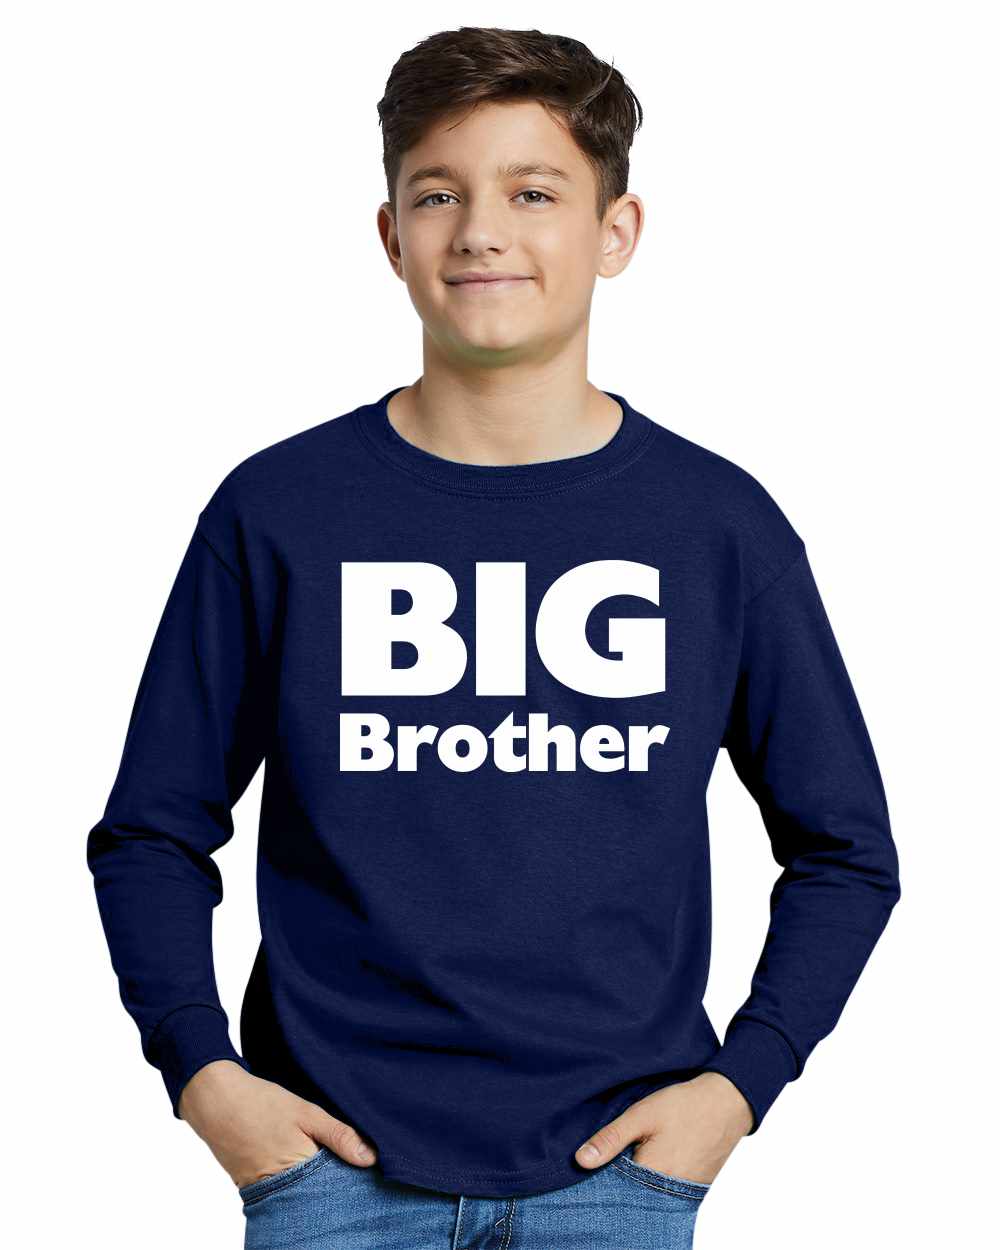 BIG BROTHER on Youth Long Sleeve Shirt (#861-203)